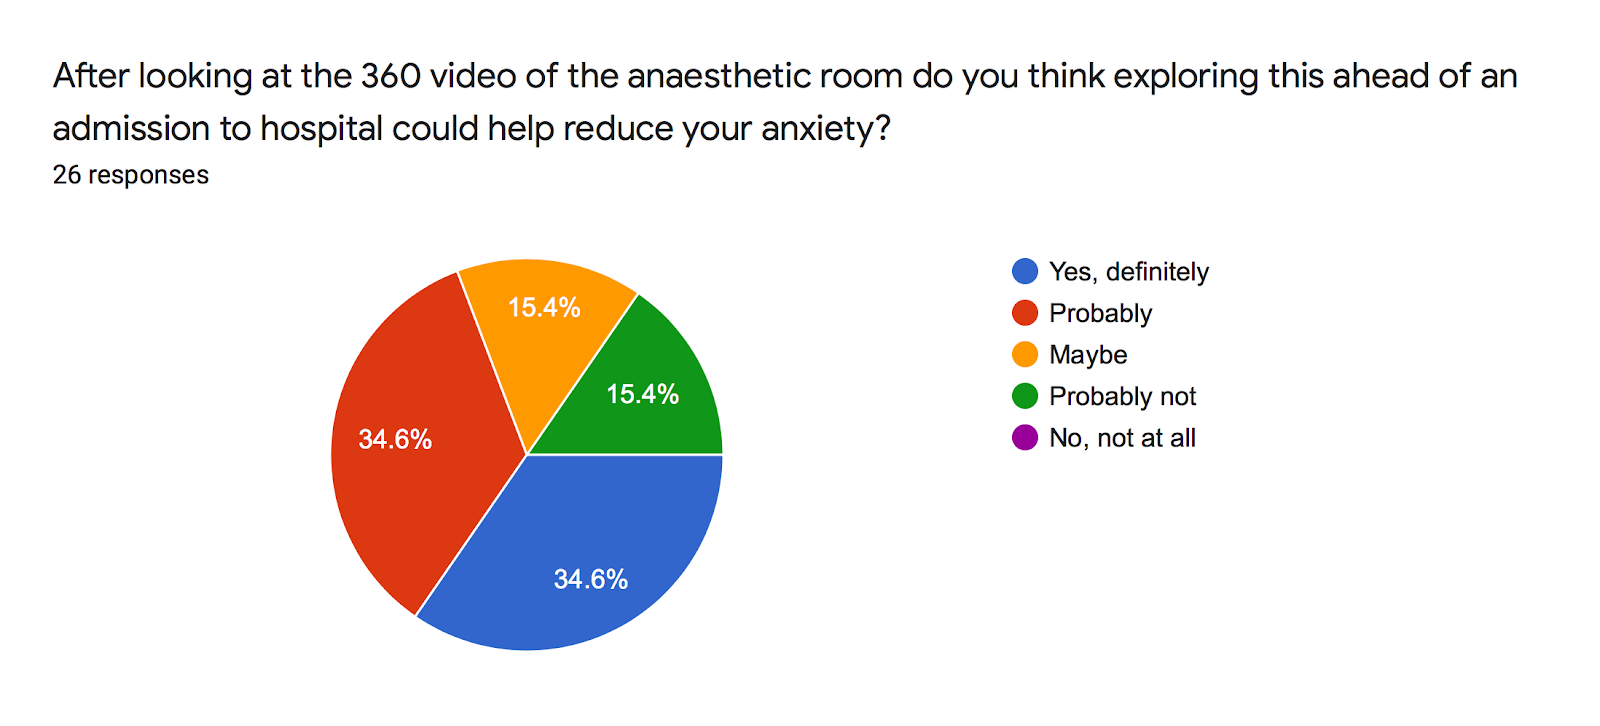 Forms response chart. Question title: After looking at the 360 video of the anaesthetic room do you think exploring this ahead of an admission to hospital could help reduce your anxiety?. Number of responses: 26 responses.